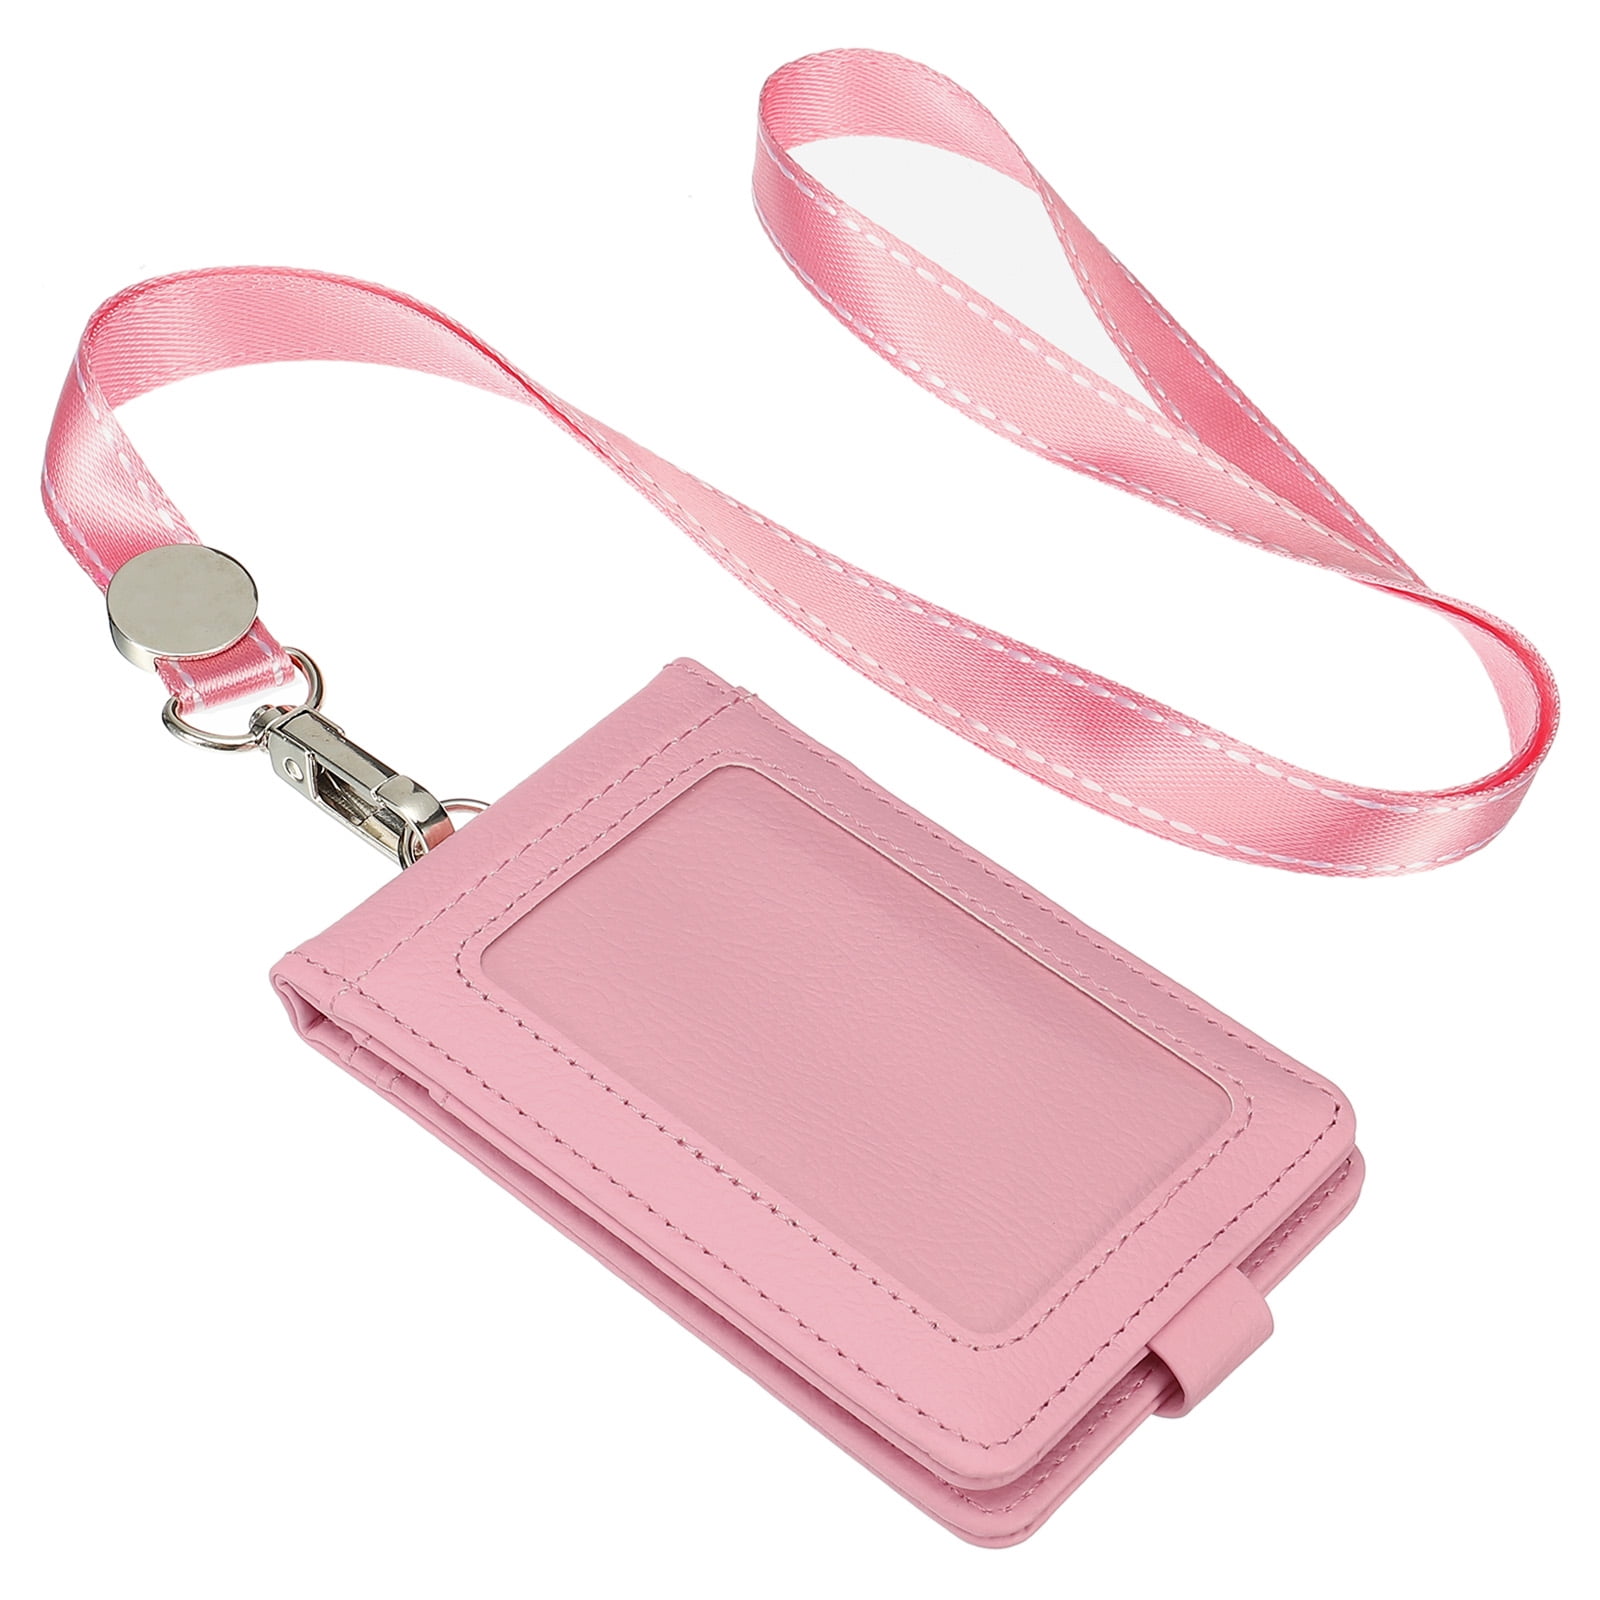 PU Leather Business Credit Card Holder Badge with Lanyard Neck